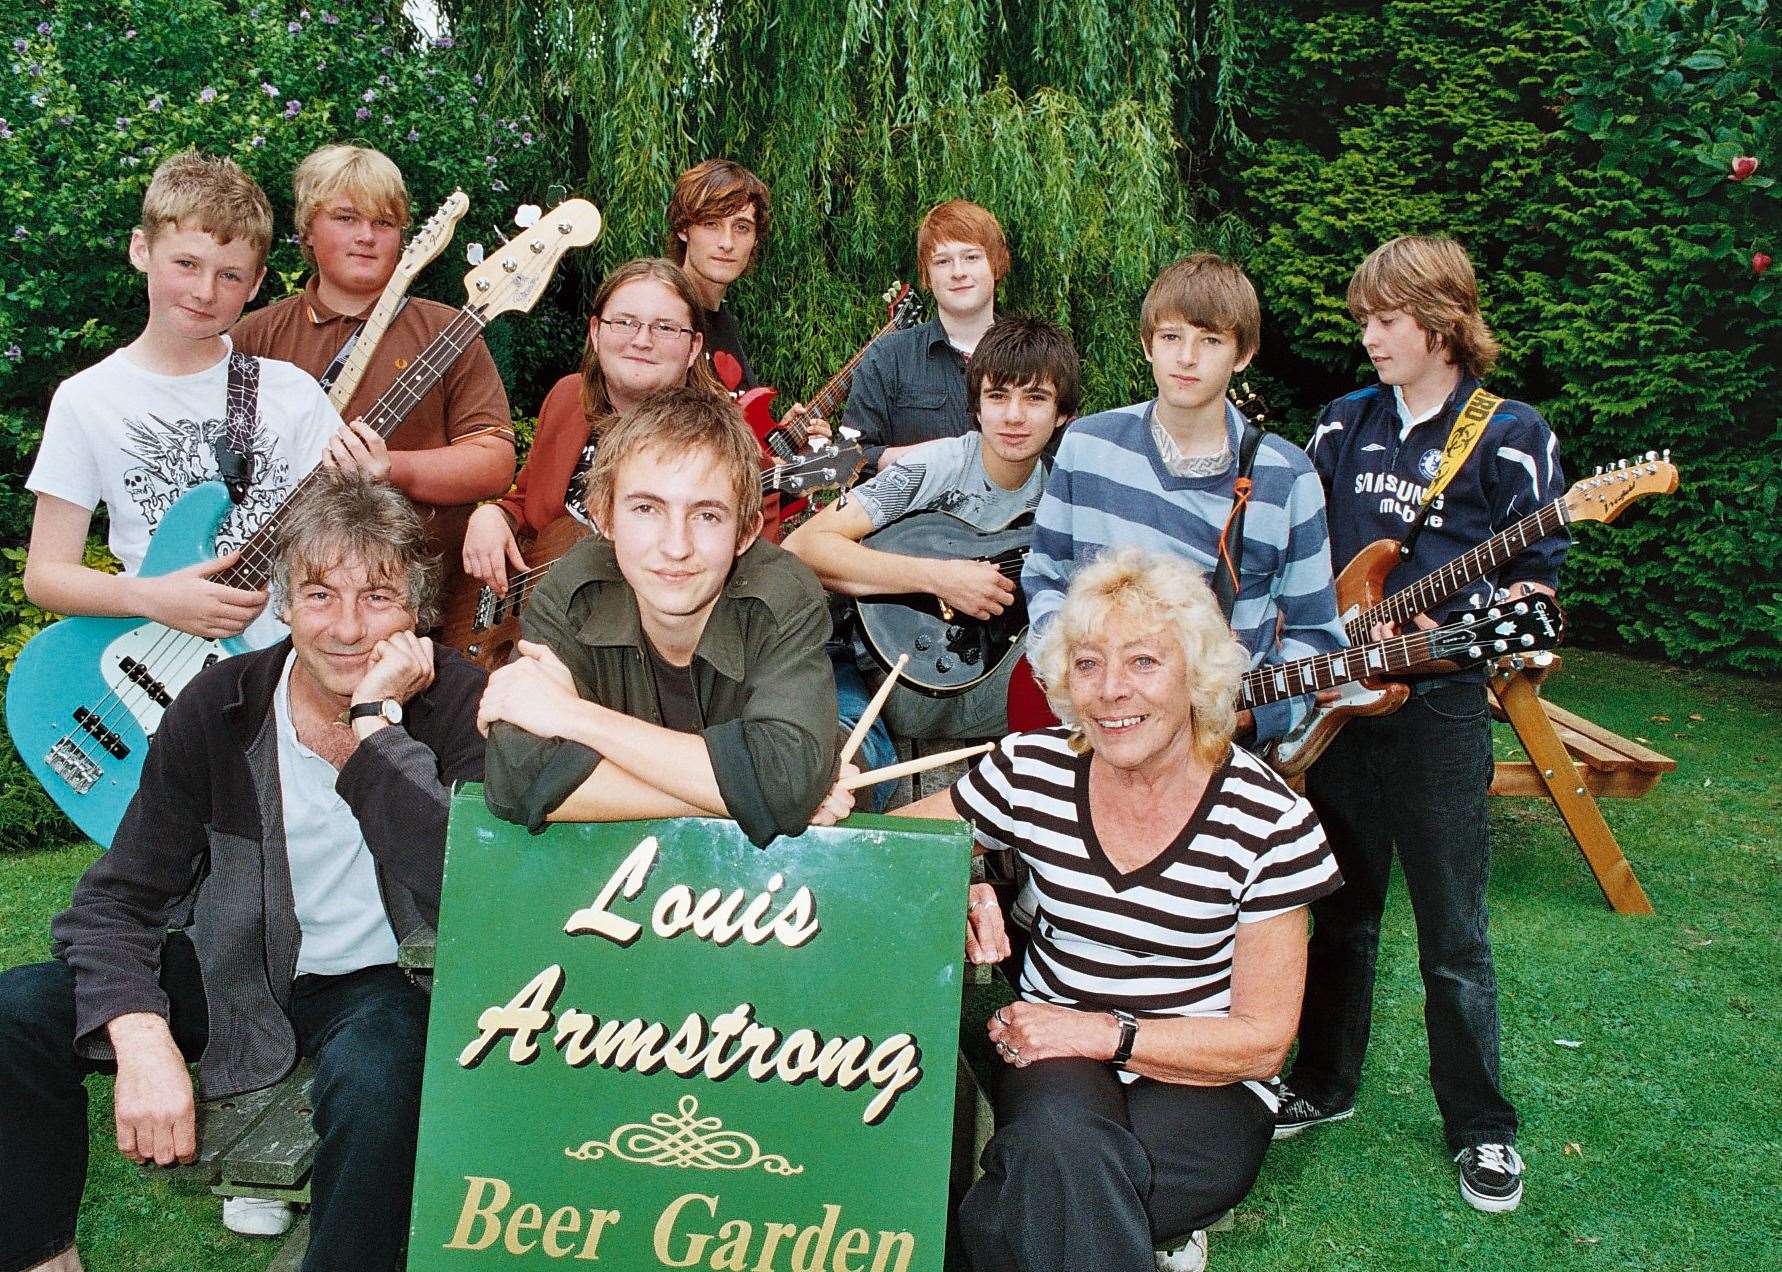 A Beer and Bands event at the Louise Armstrong, Dover. Pictured are Bert Osborn (front left) and Jackie Bowles with Bert's students who played at the event.